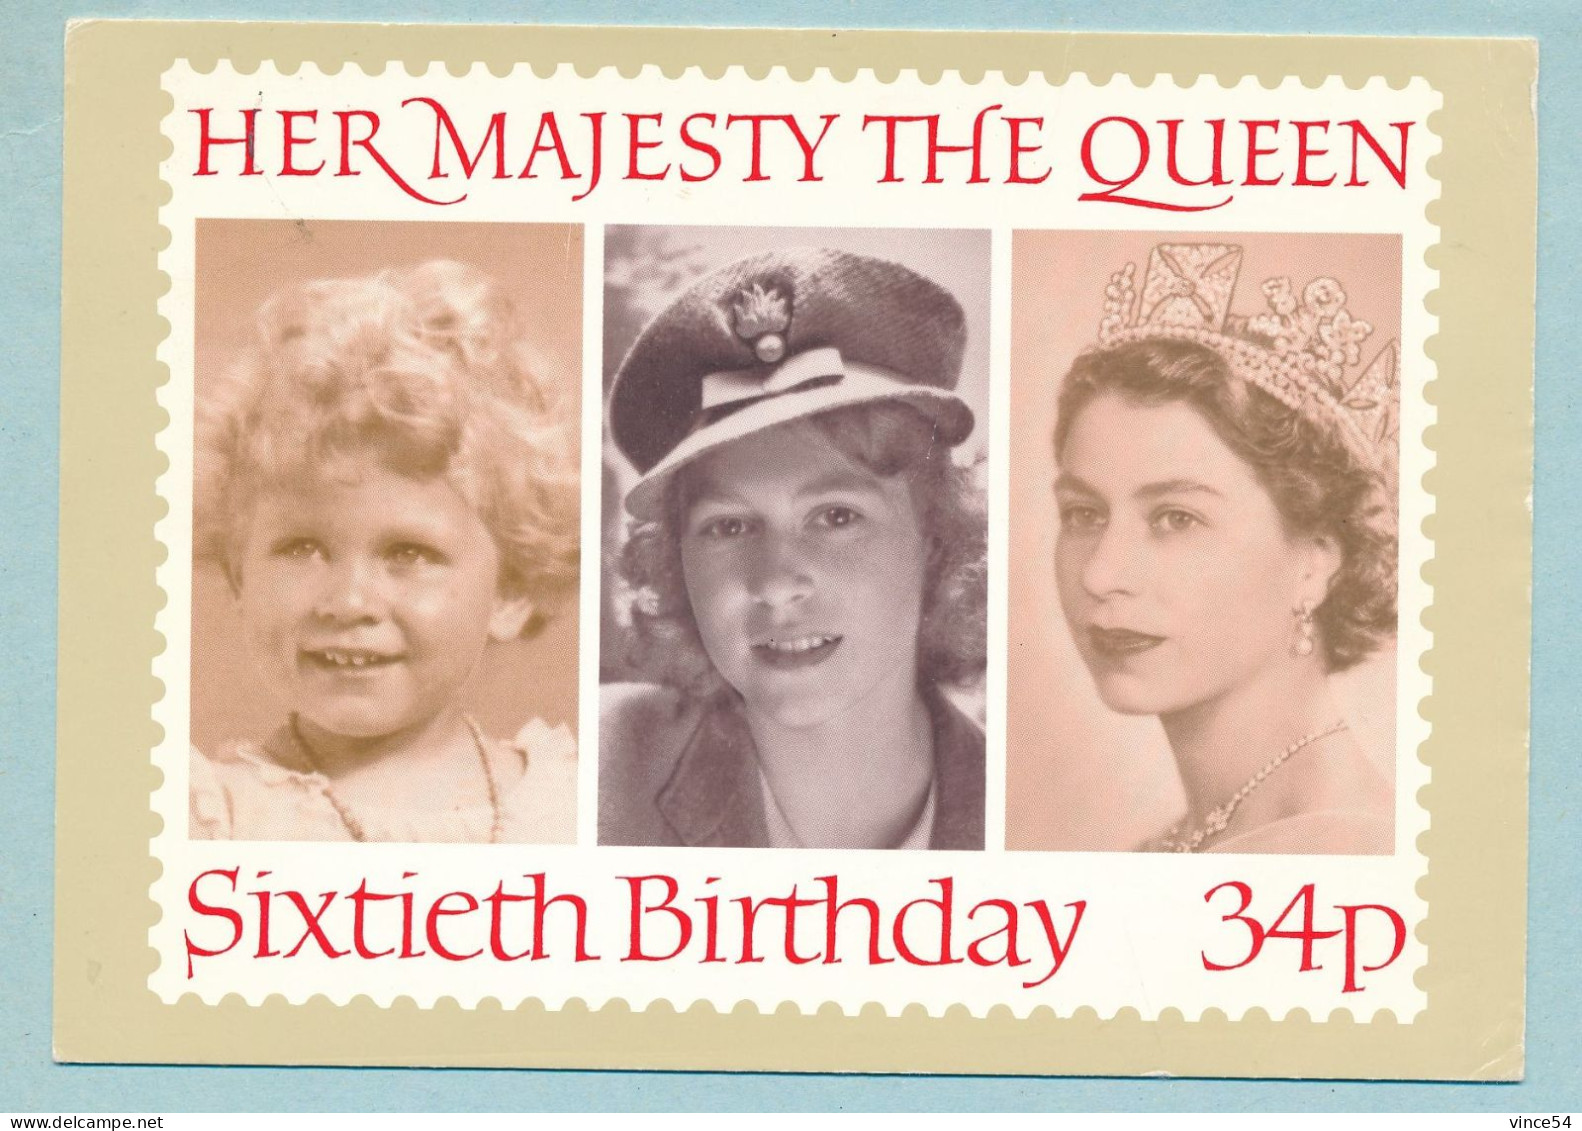 Her Majesty The Queen - Sixtieth Birthday - Portraits From 1828, 1942 & 1952 - Reproduced From A Stamp - Koninklijke Families